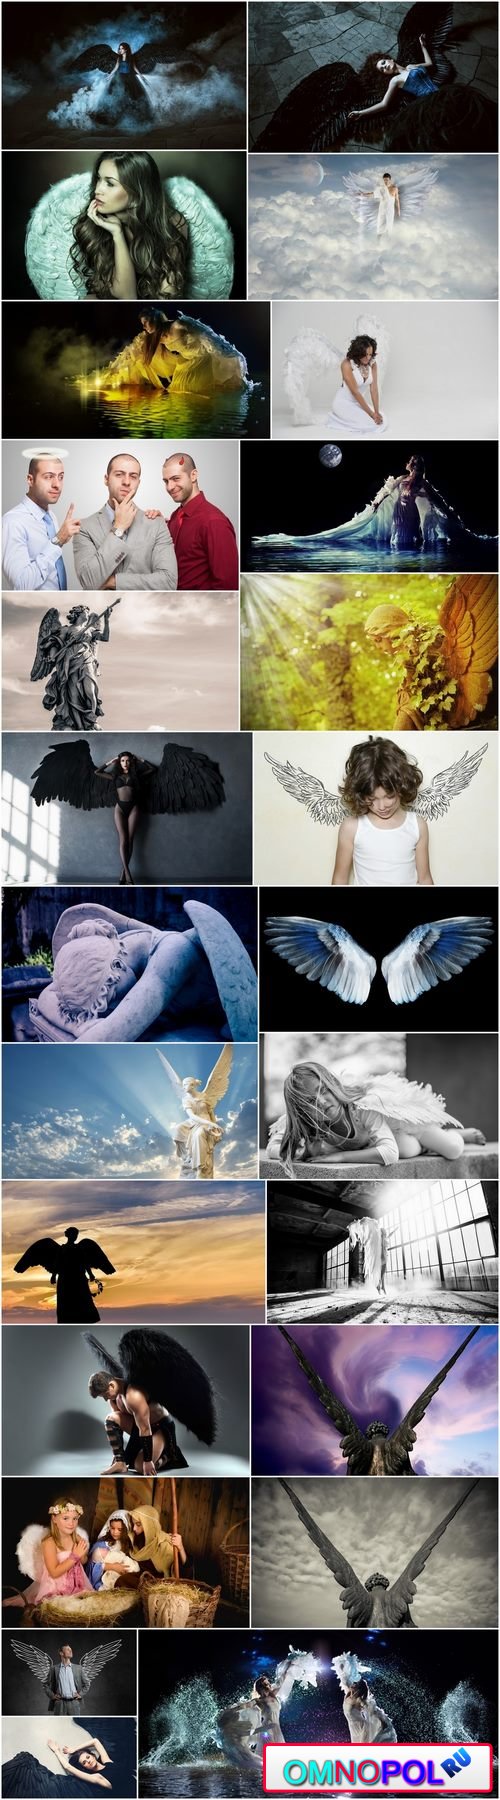 Angel wings wing conceptual illustration girl woman sculpture statue 25 HQ Jpeg